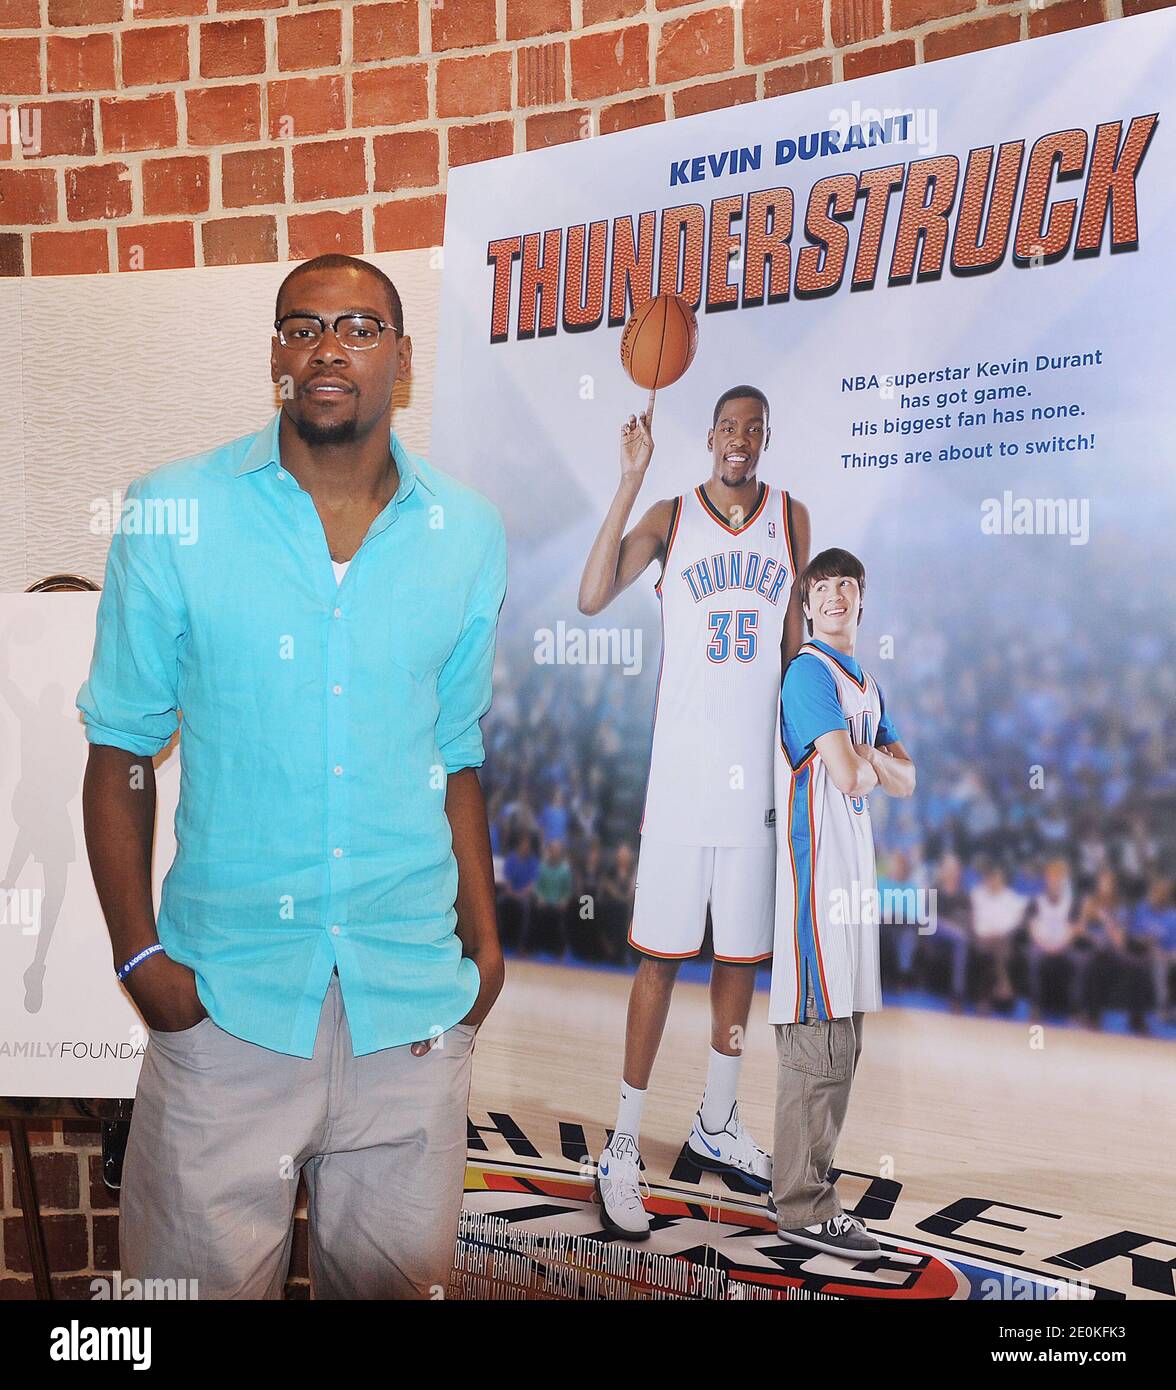 Basketball player Kevin Durant of the Oklahoma City Thunder attends a photo  opportunity for the movie, Thunderstruck in Georgetown in Washington, DC,  USA on August 22, 2012. The film is about Brian